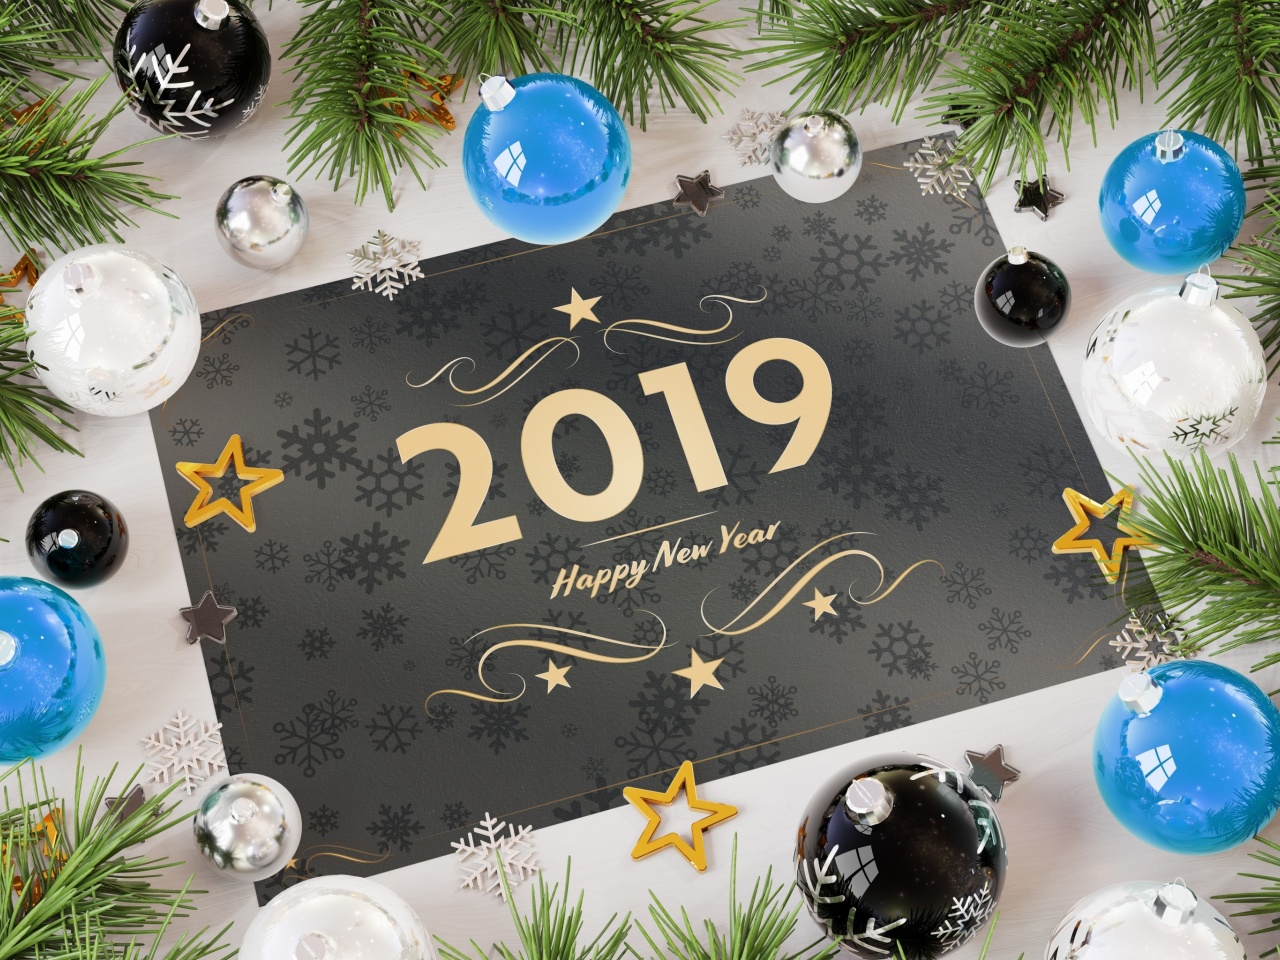 2019 Happy New Year Message wallpaper 1280x960